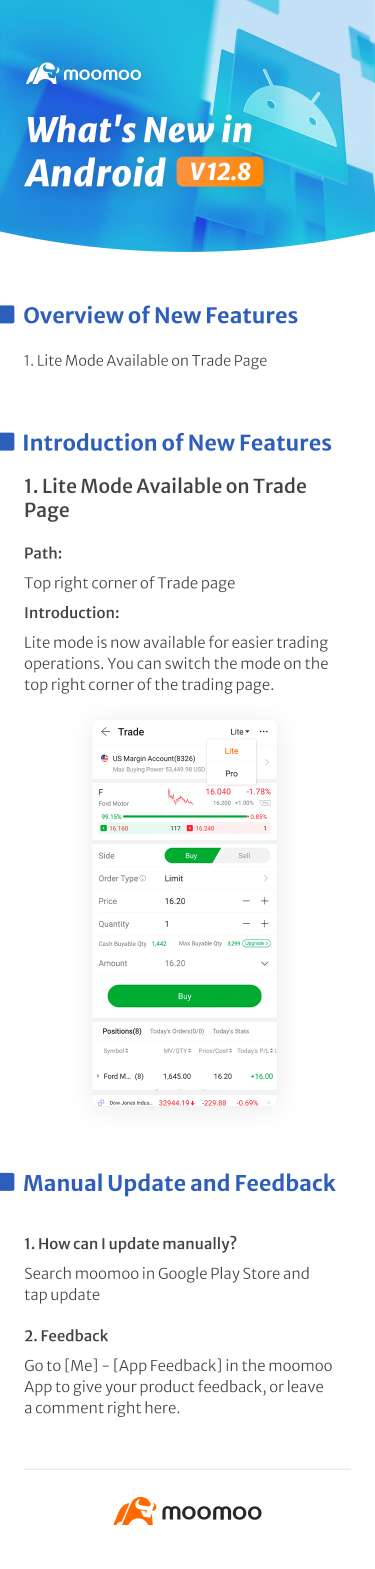 What's New: Lite Mode of Trade Page Available in Android v12.8